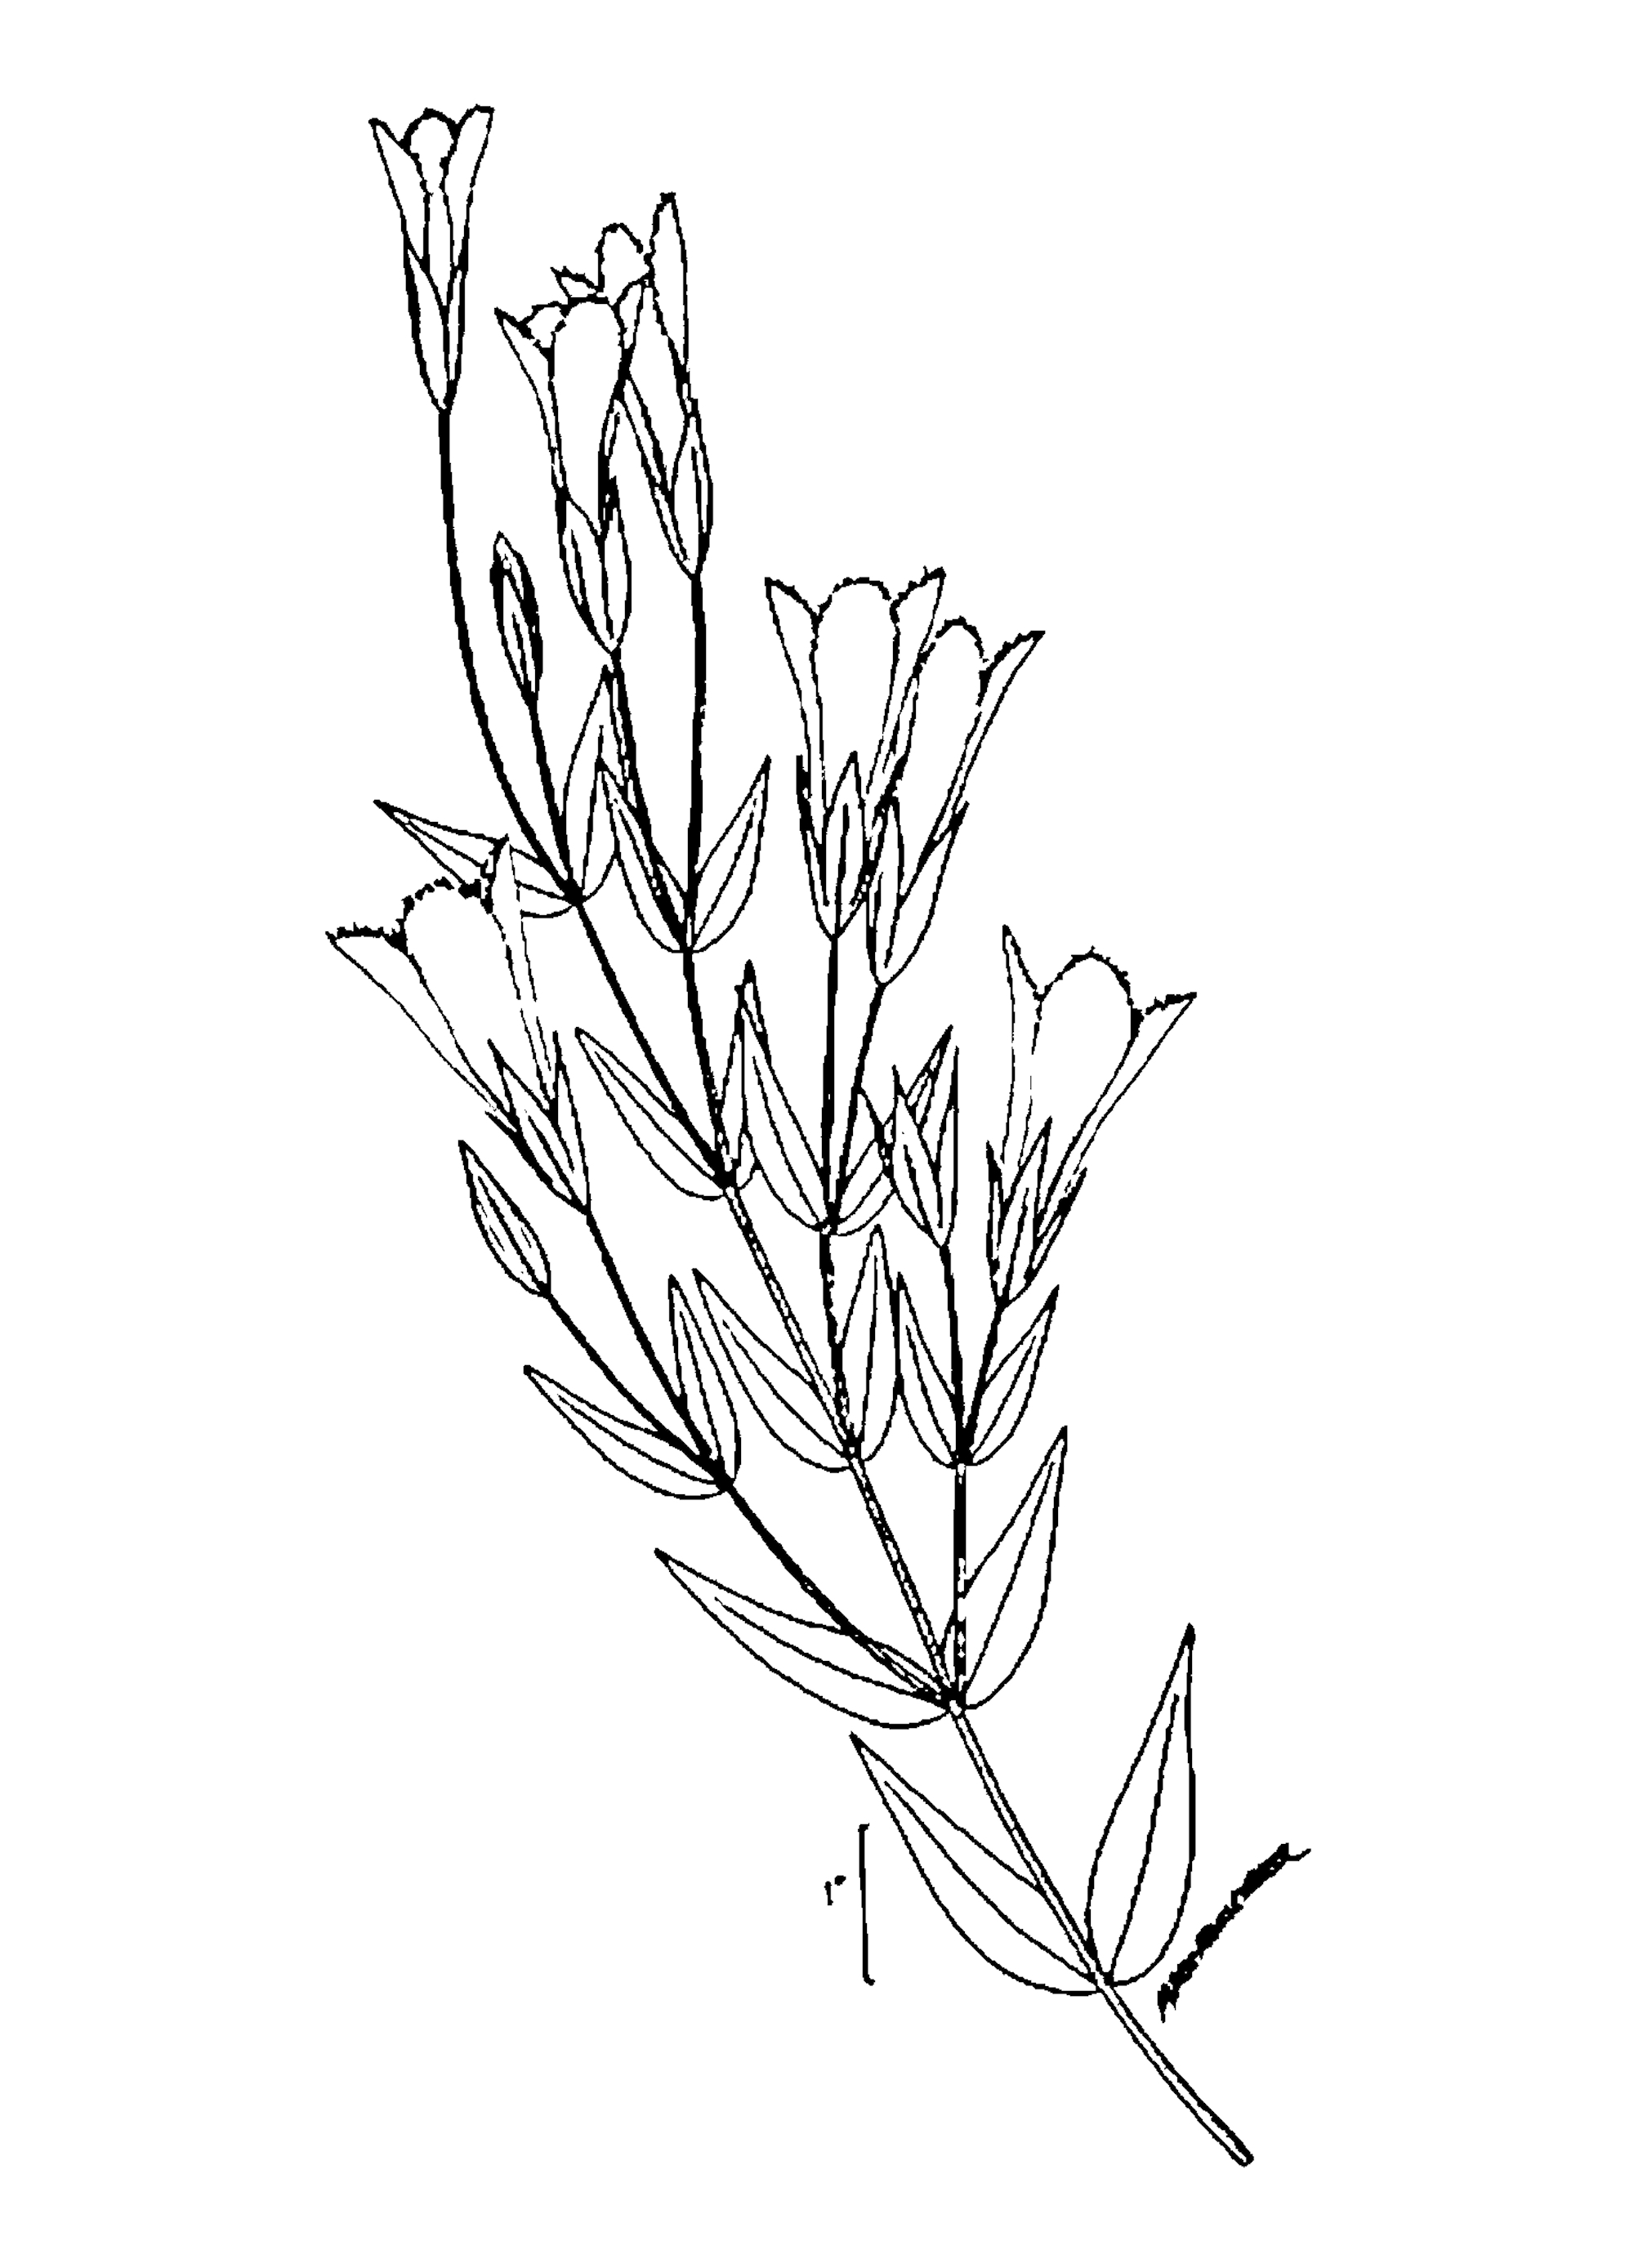 Fringed Gentian botanical line drawing from USDA  NRCS, Wetland flora: Field office illustrated guide to plant species., USDA NRCS National Wetland Team.